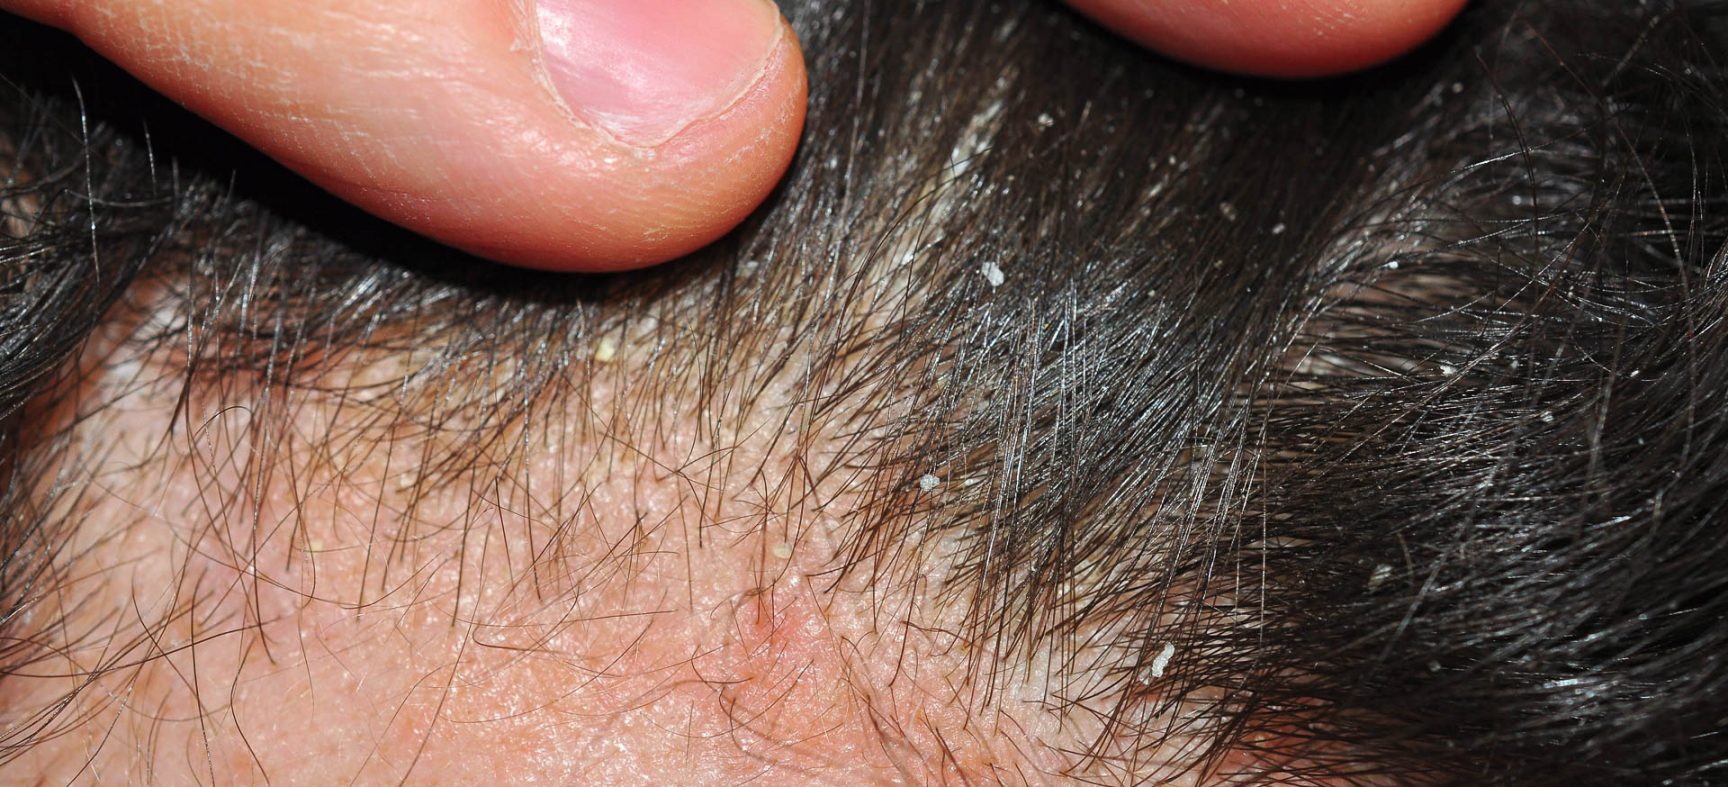 A Case of Hypotension and Scalp Psoriasis